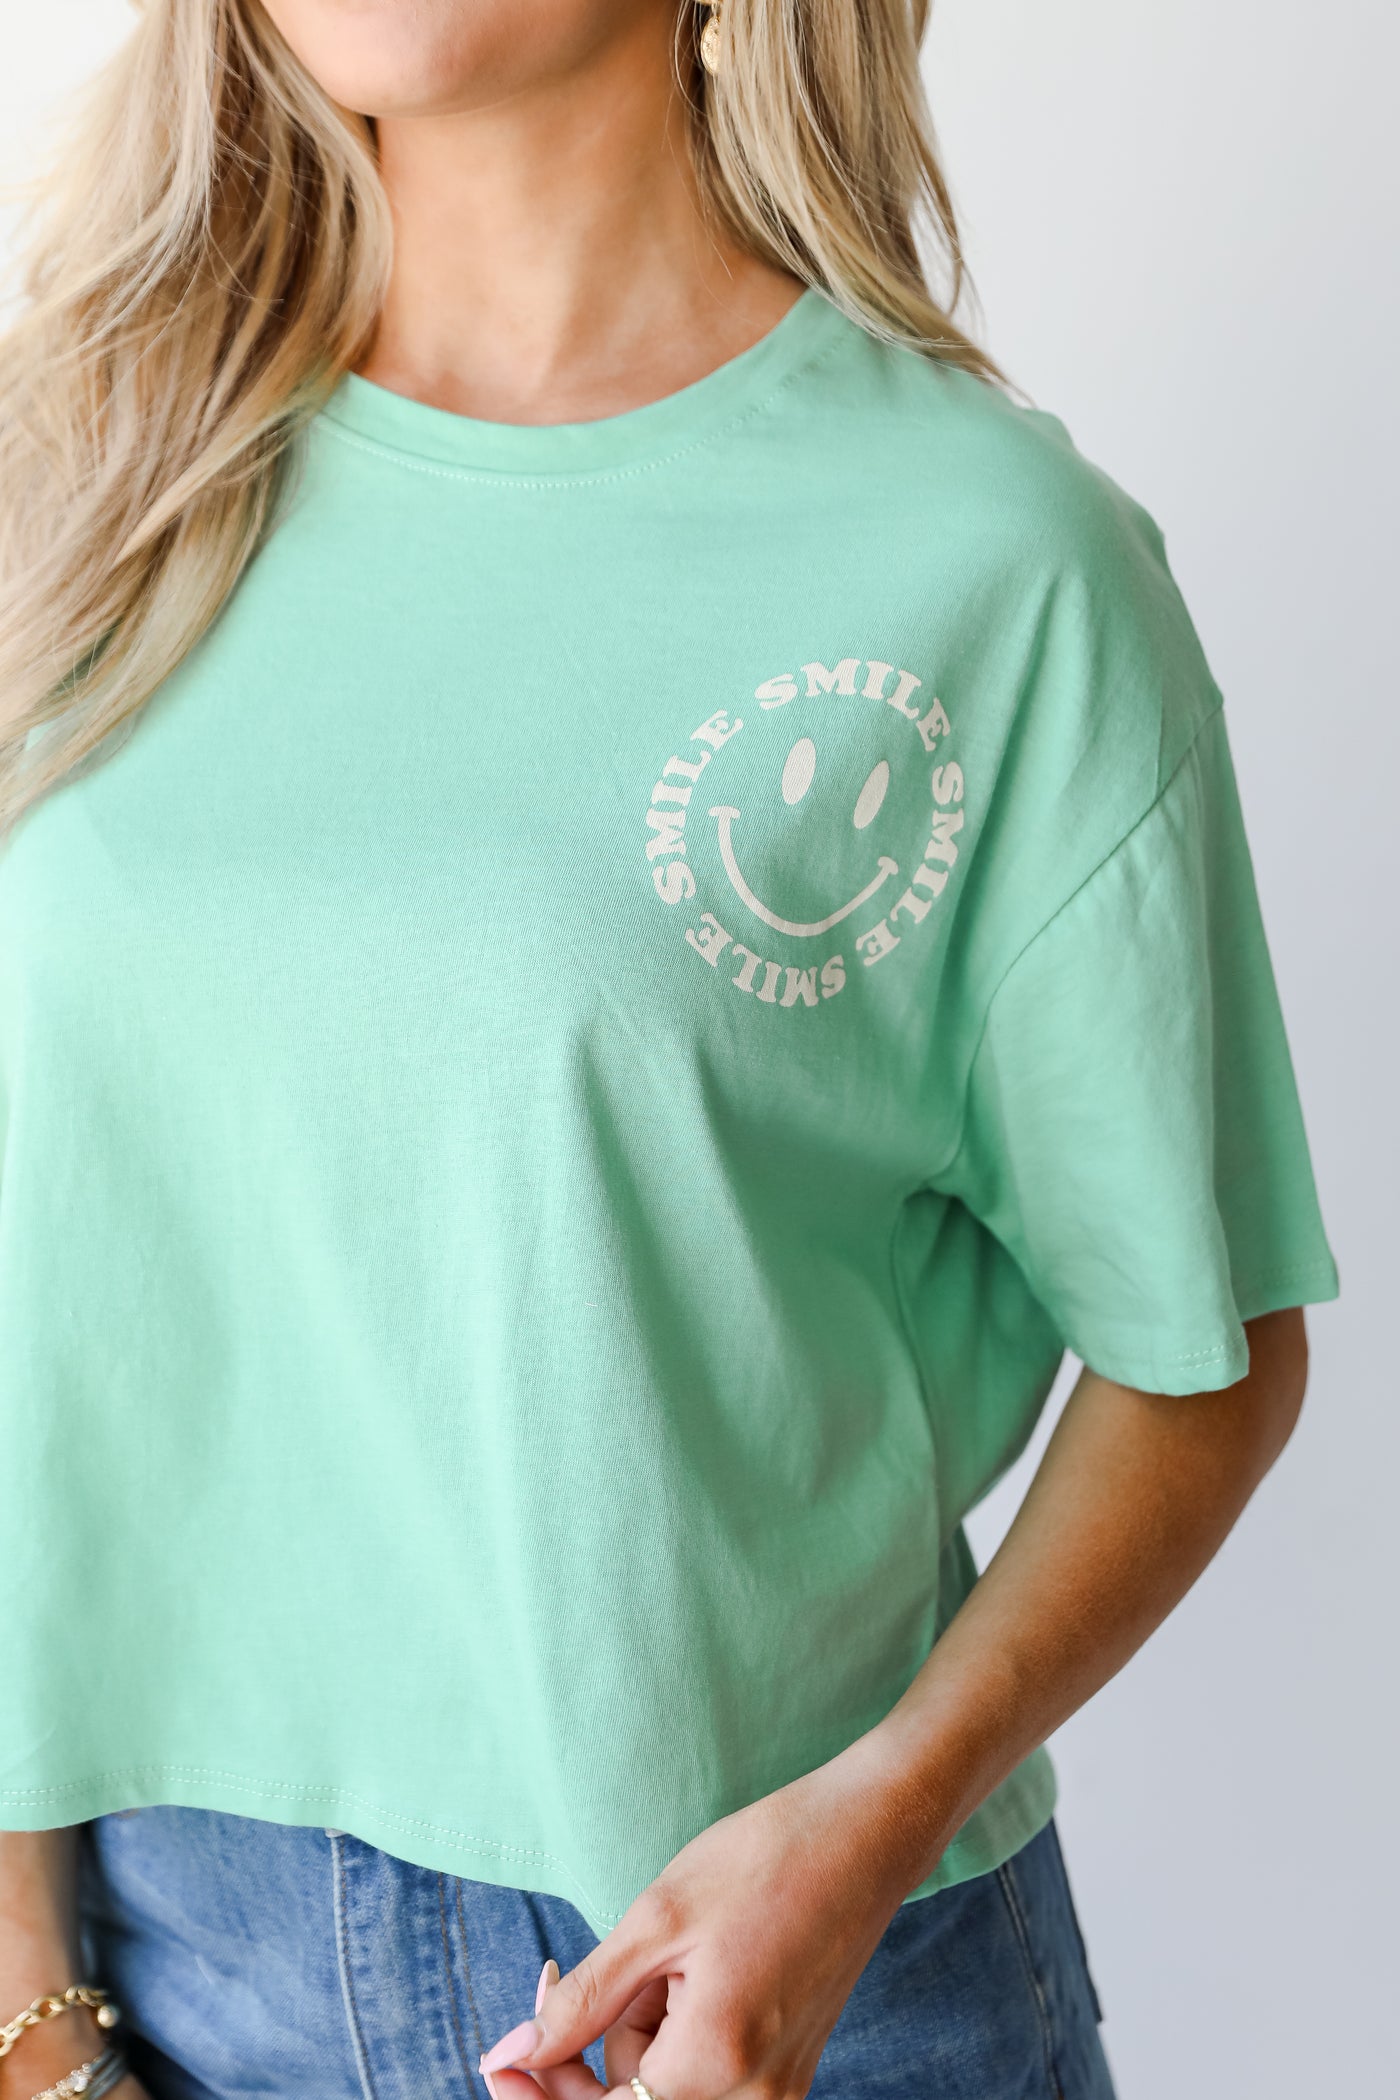 Smile Cropped Graphic Tee close up